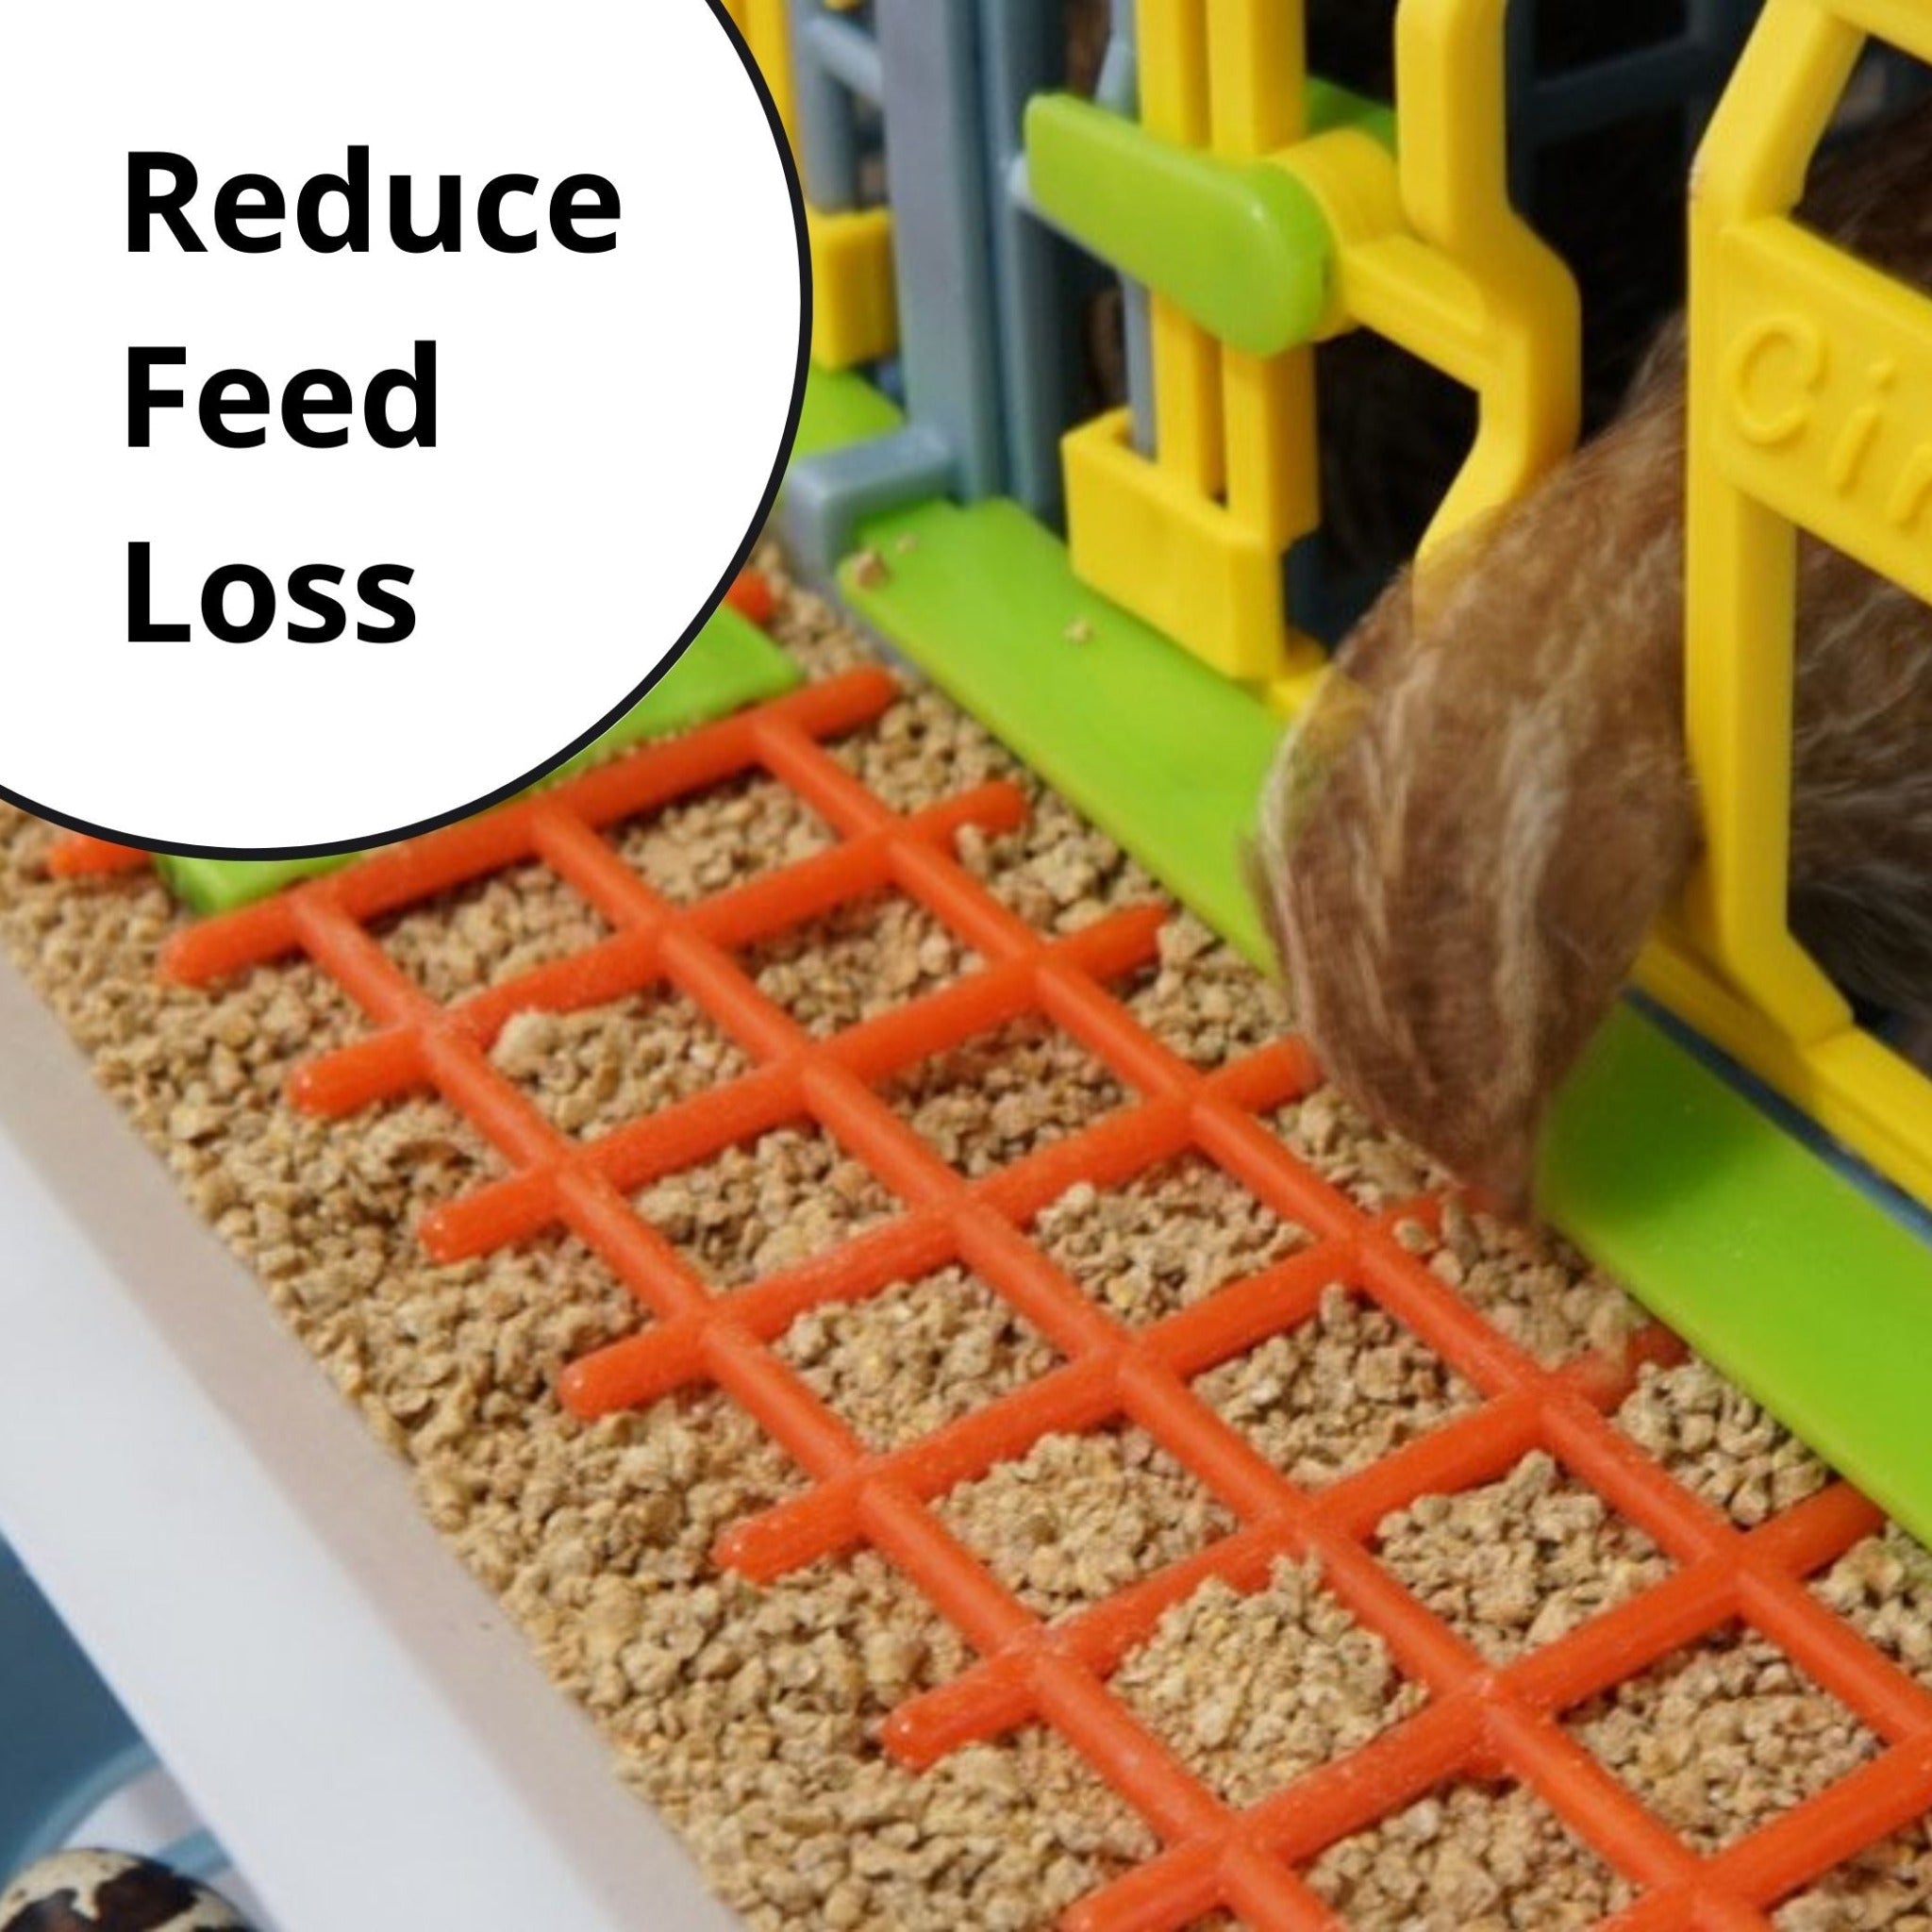 Hatching Time Cimuka. Reduced feed loss with smart-feeder grill shown in image. Quail eating from feeding trough equipped with smart-feed grill.